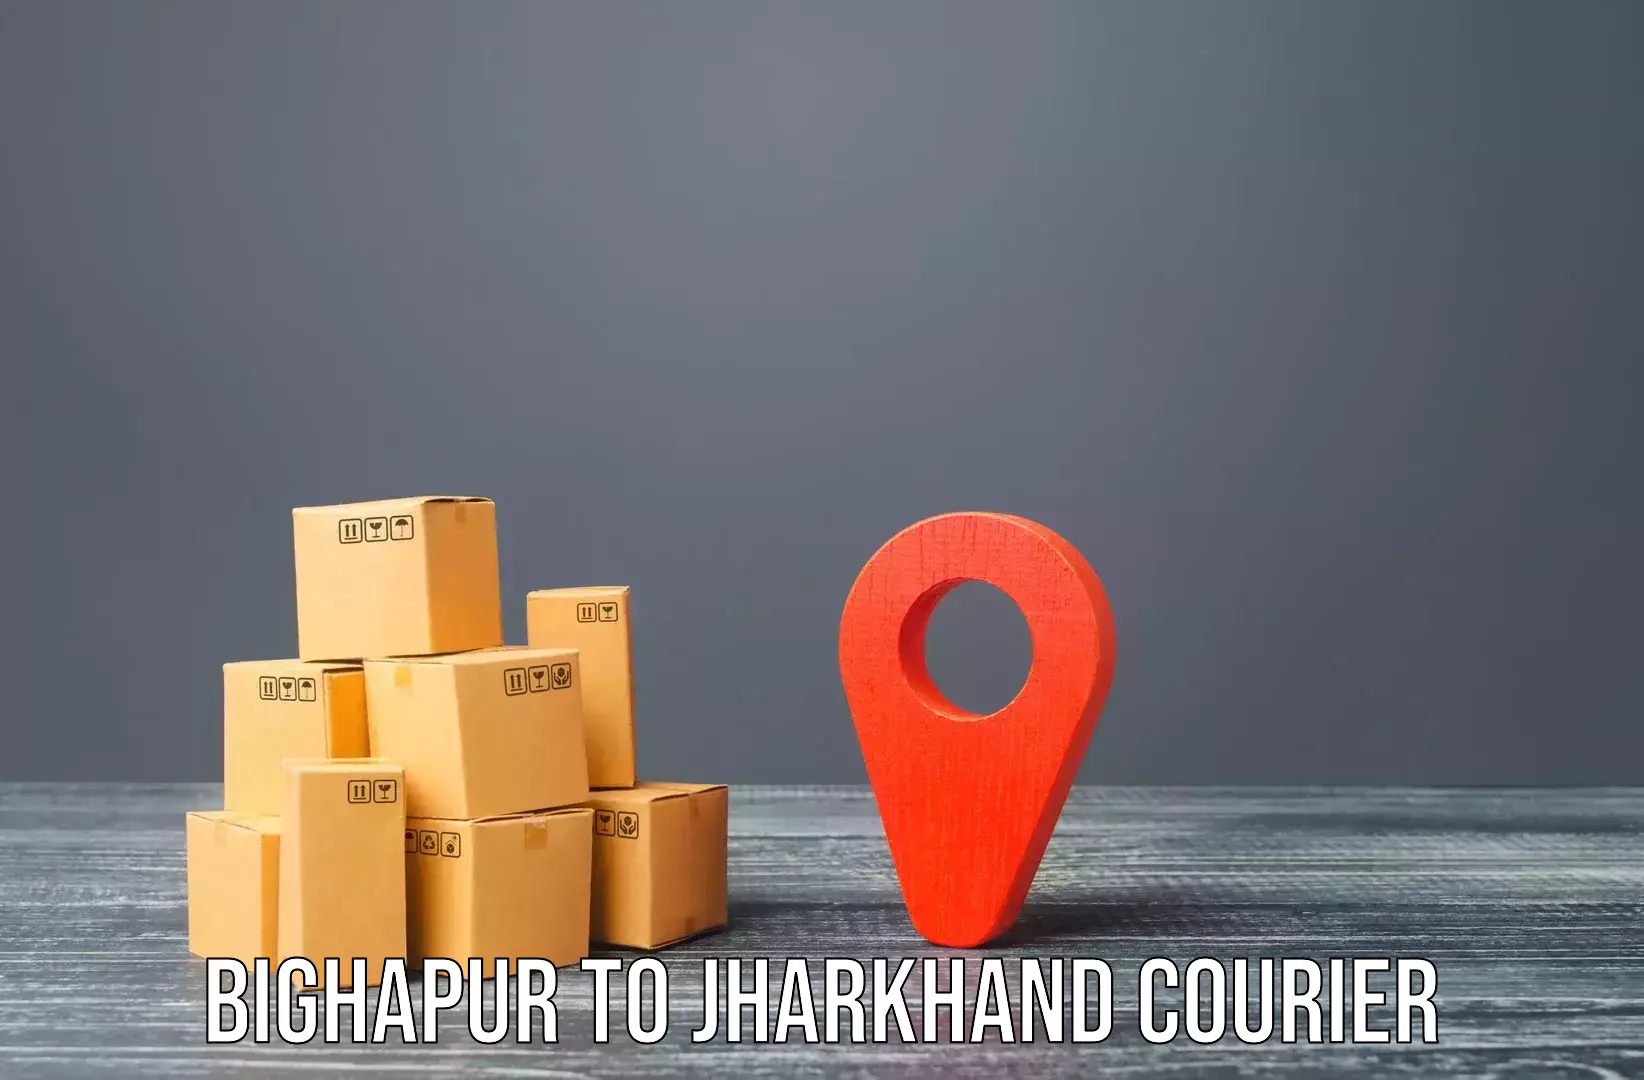 Household transport experts Bighapur to Jharkhand